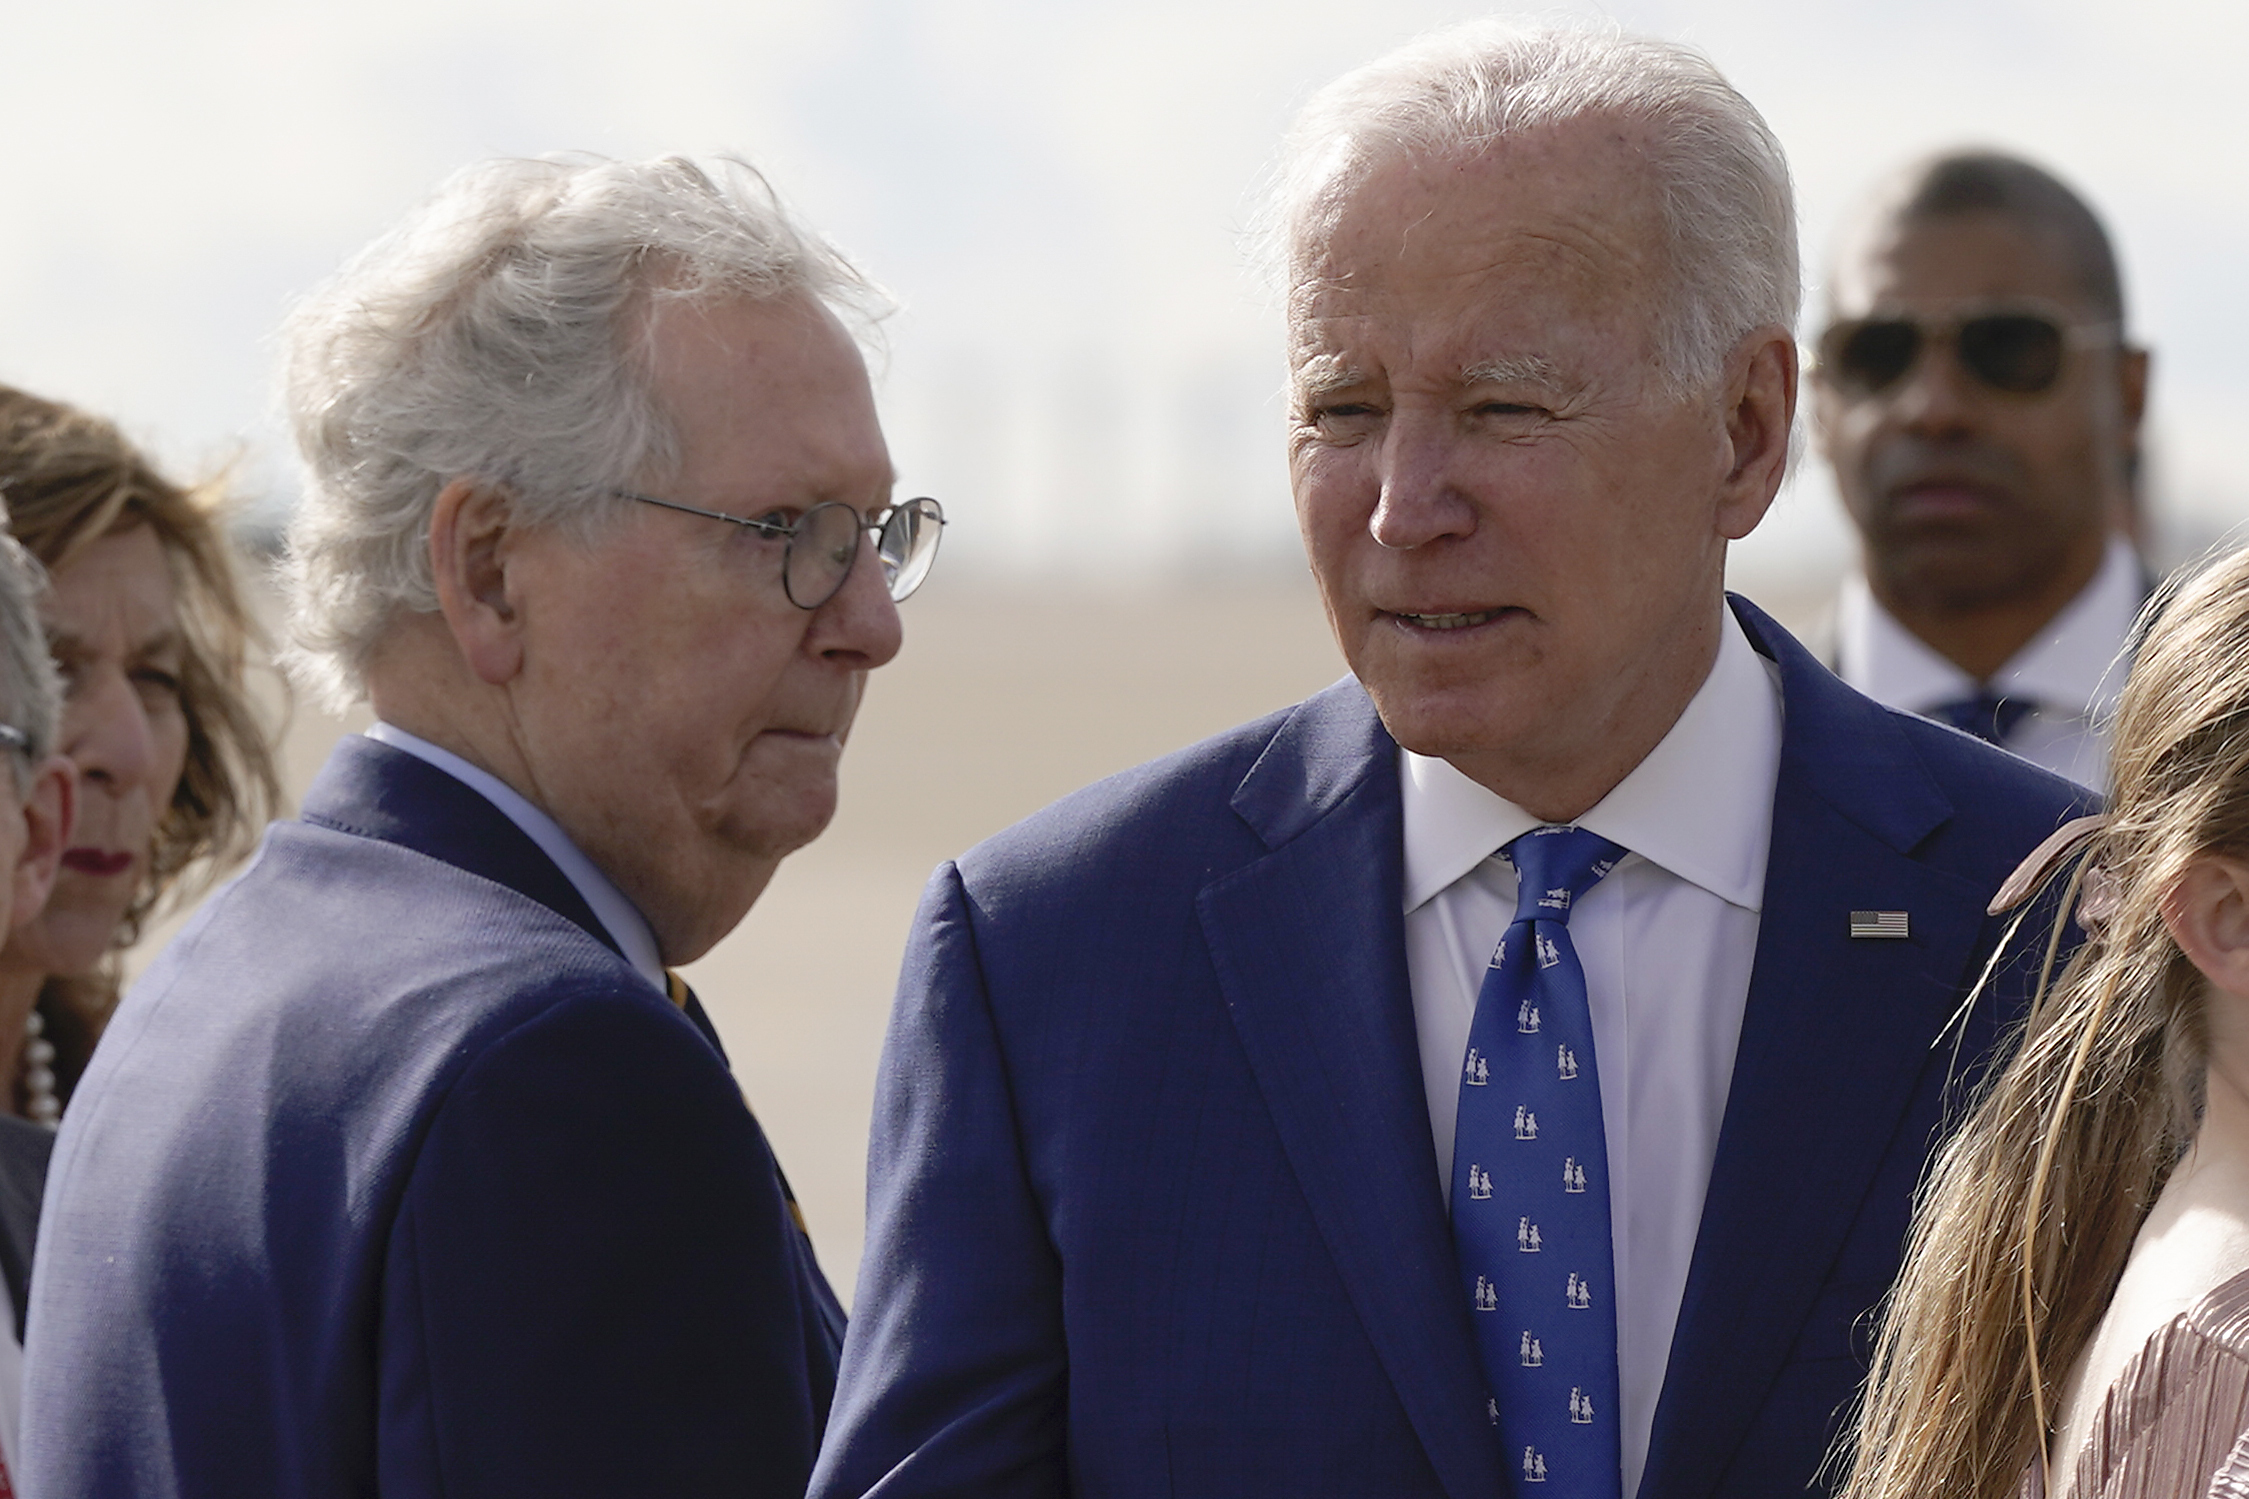 Biden Mourns McConnell’s Departure Even Though They ‘Fought Like Hell’